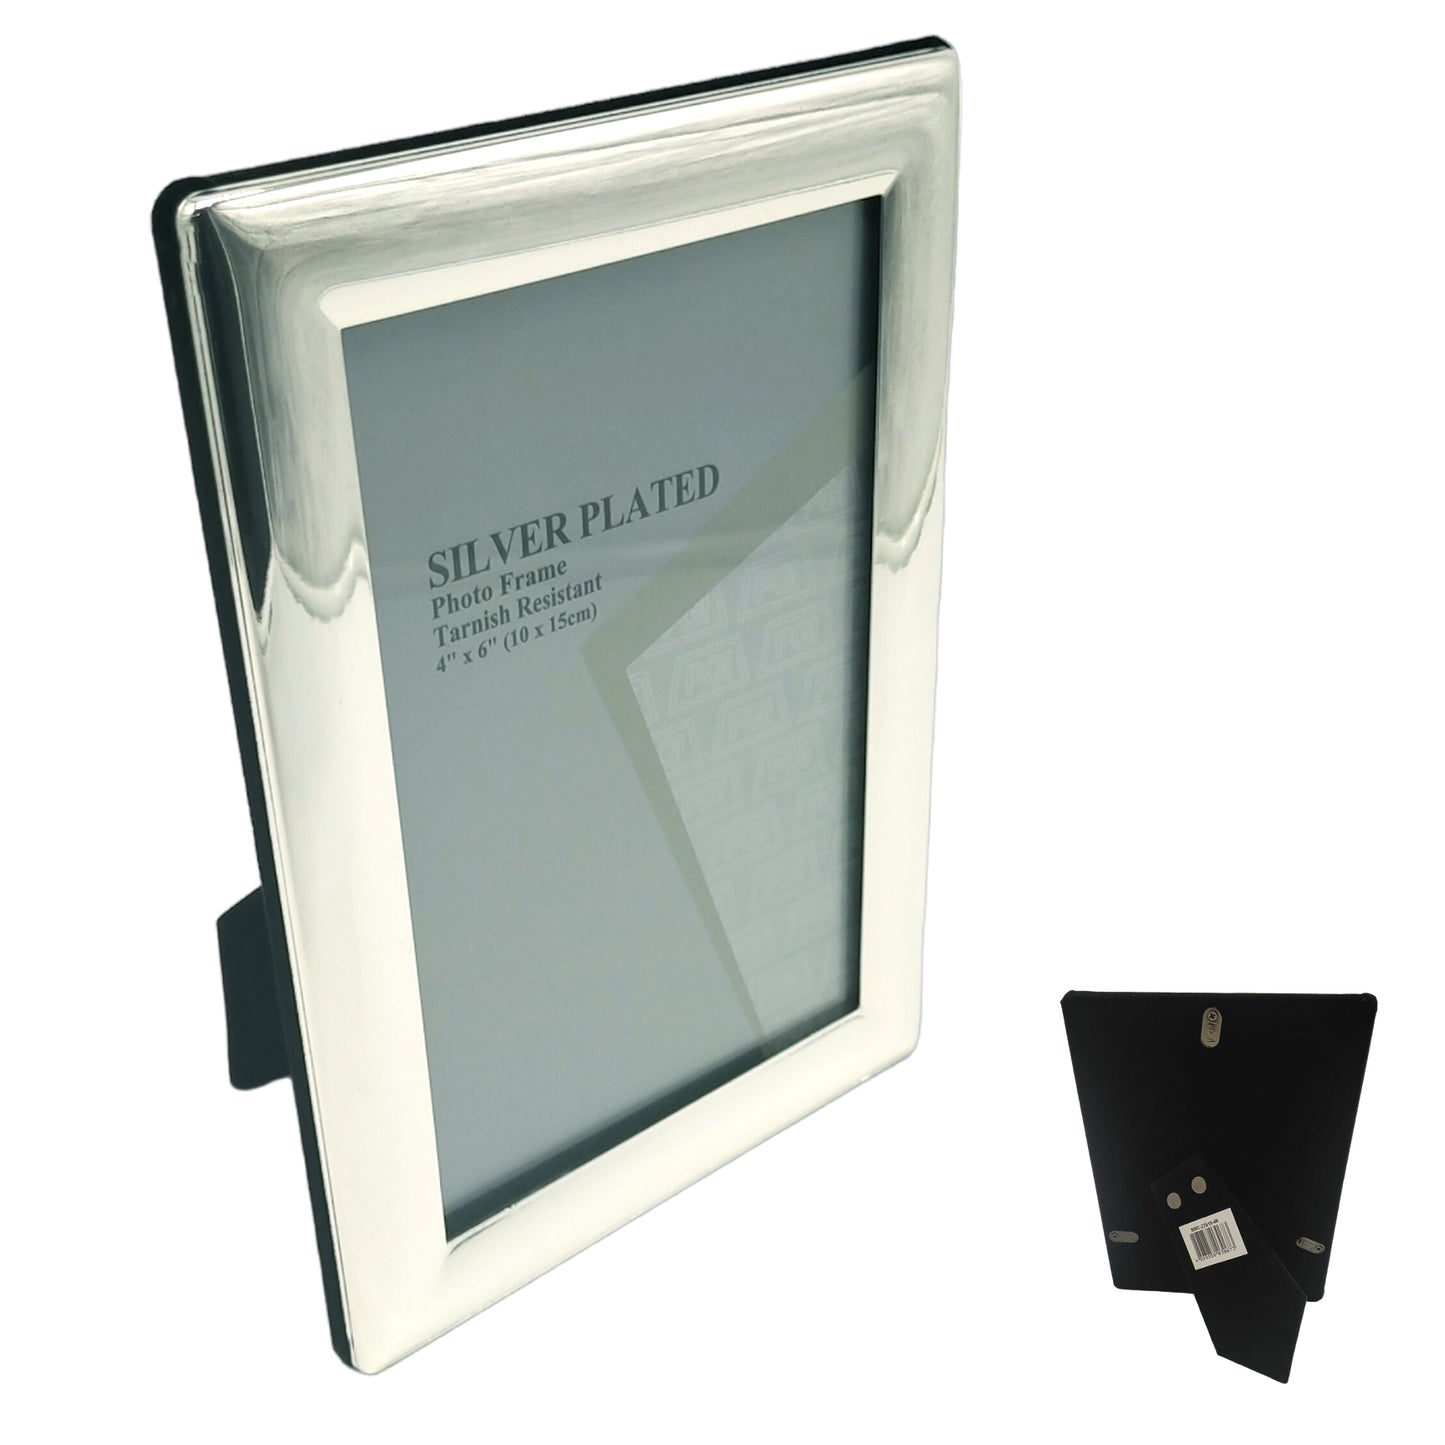 Silver Plated Photo Frame 4"x6"